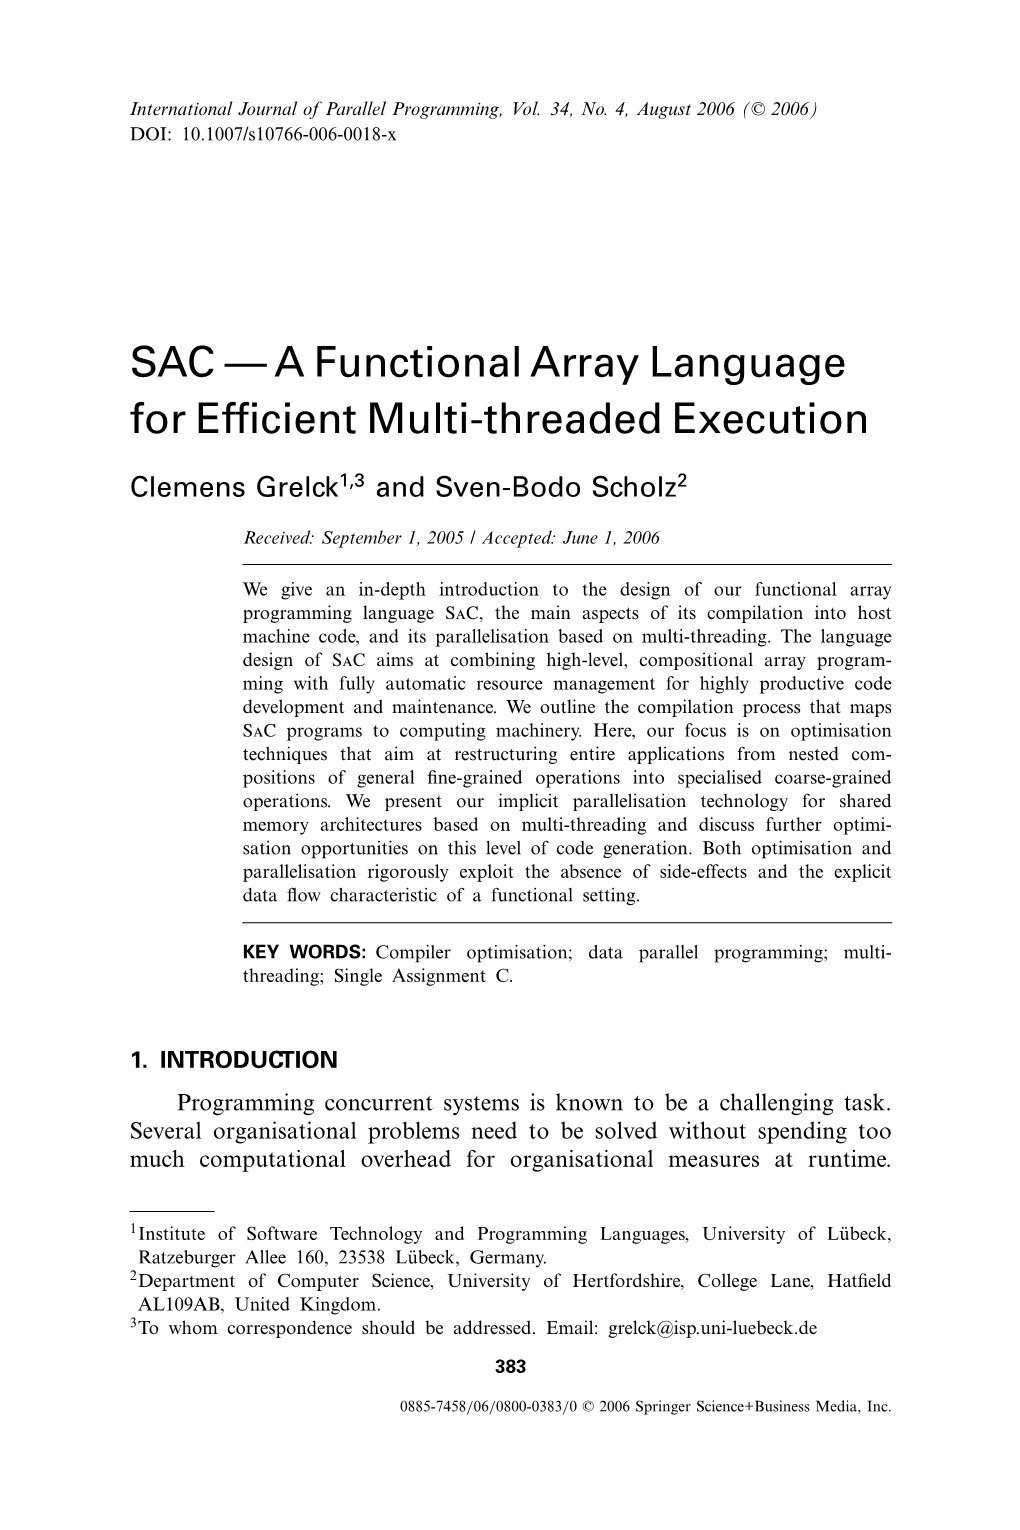 SAC — a Functional Array Language for Efficient Multi-Threaded Execution